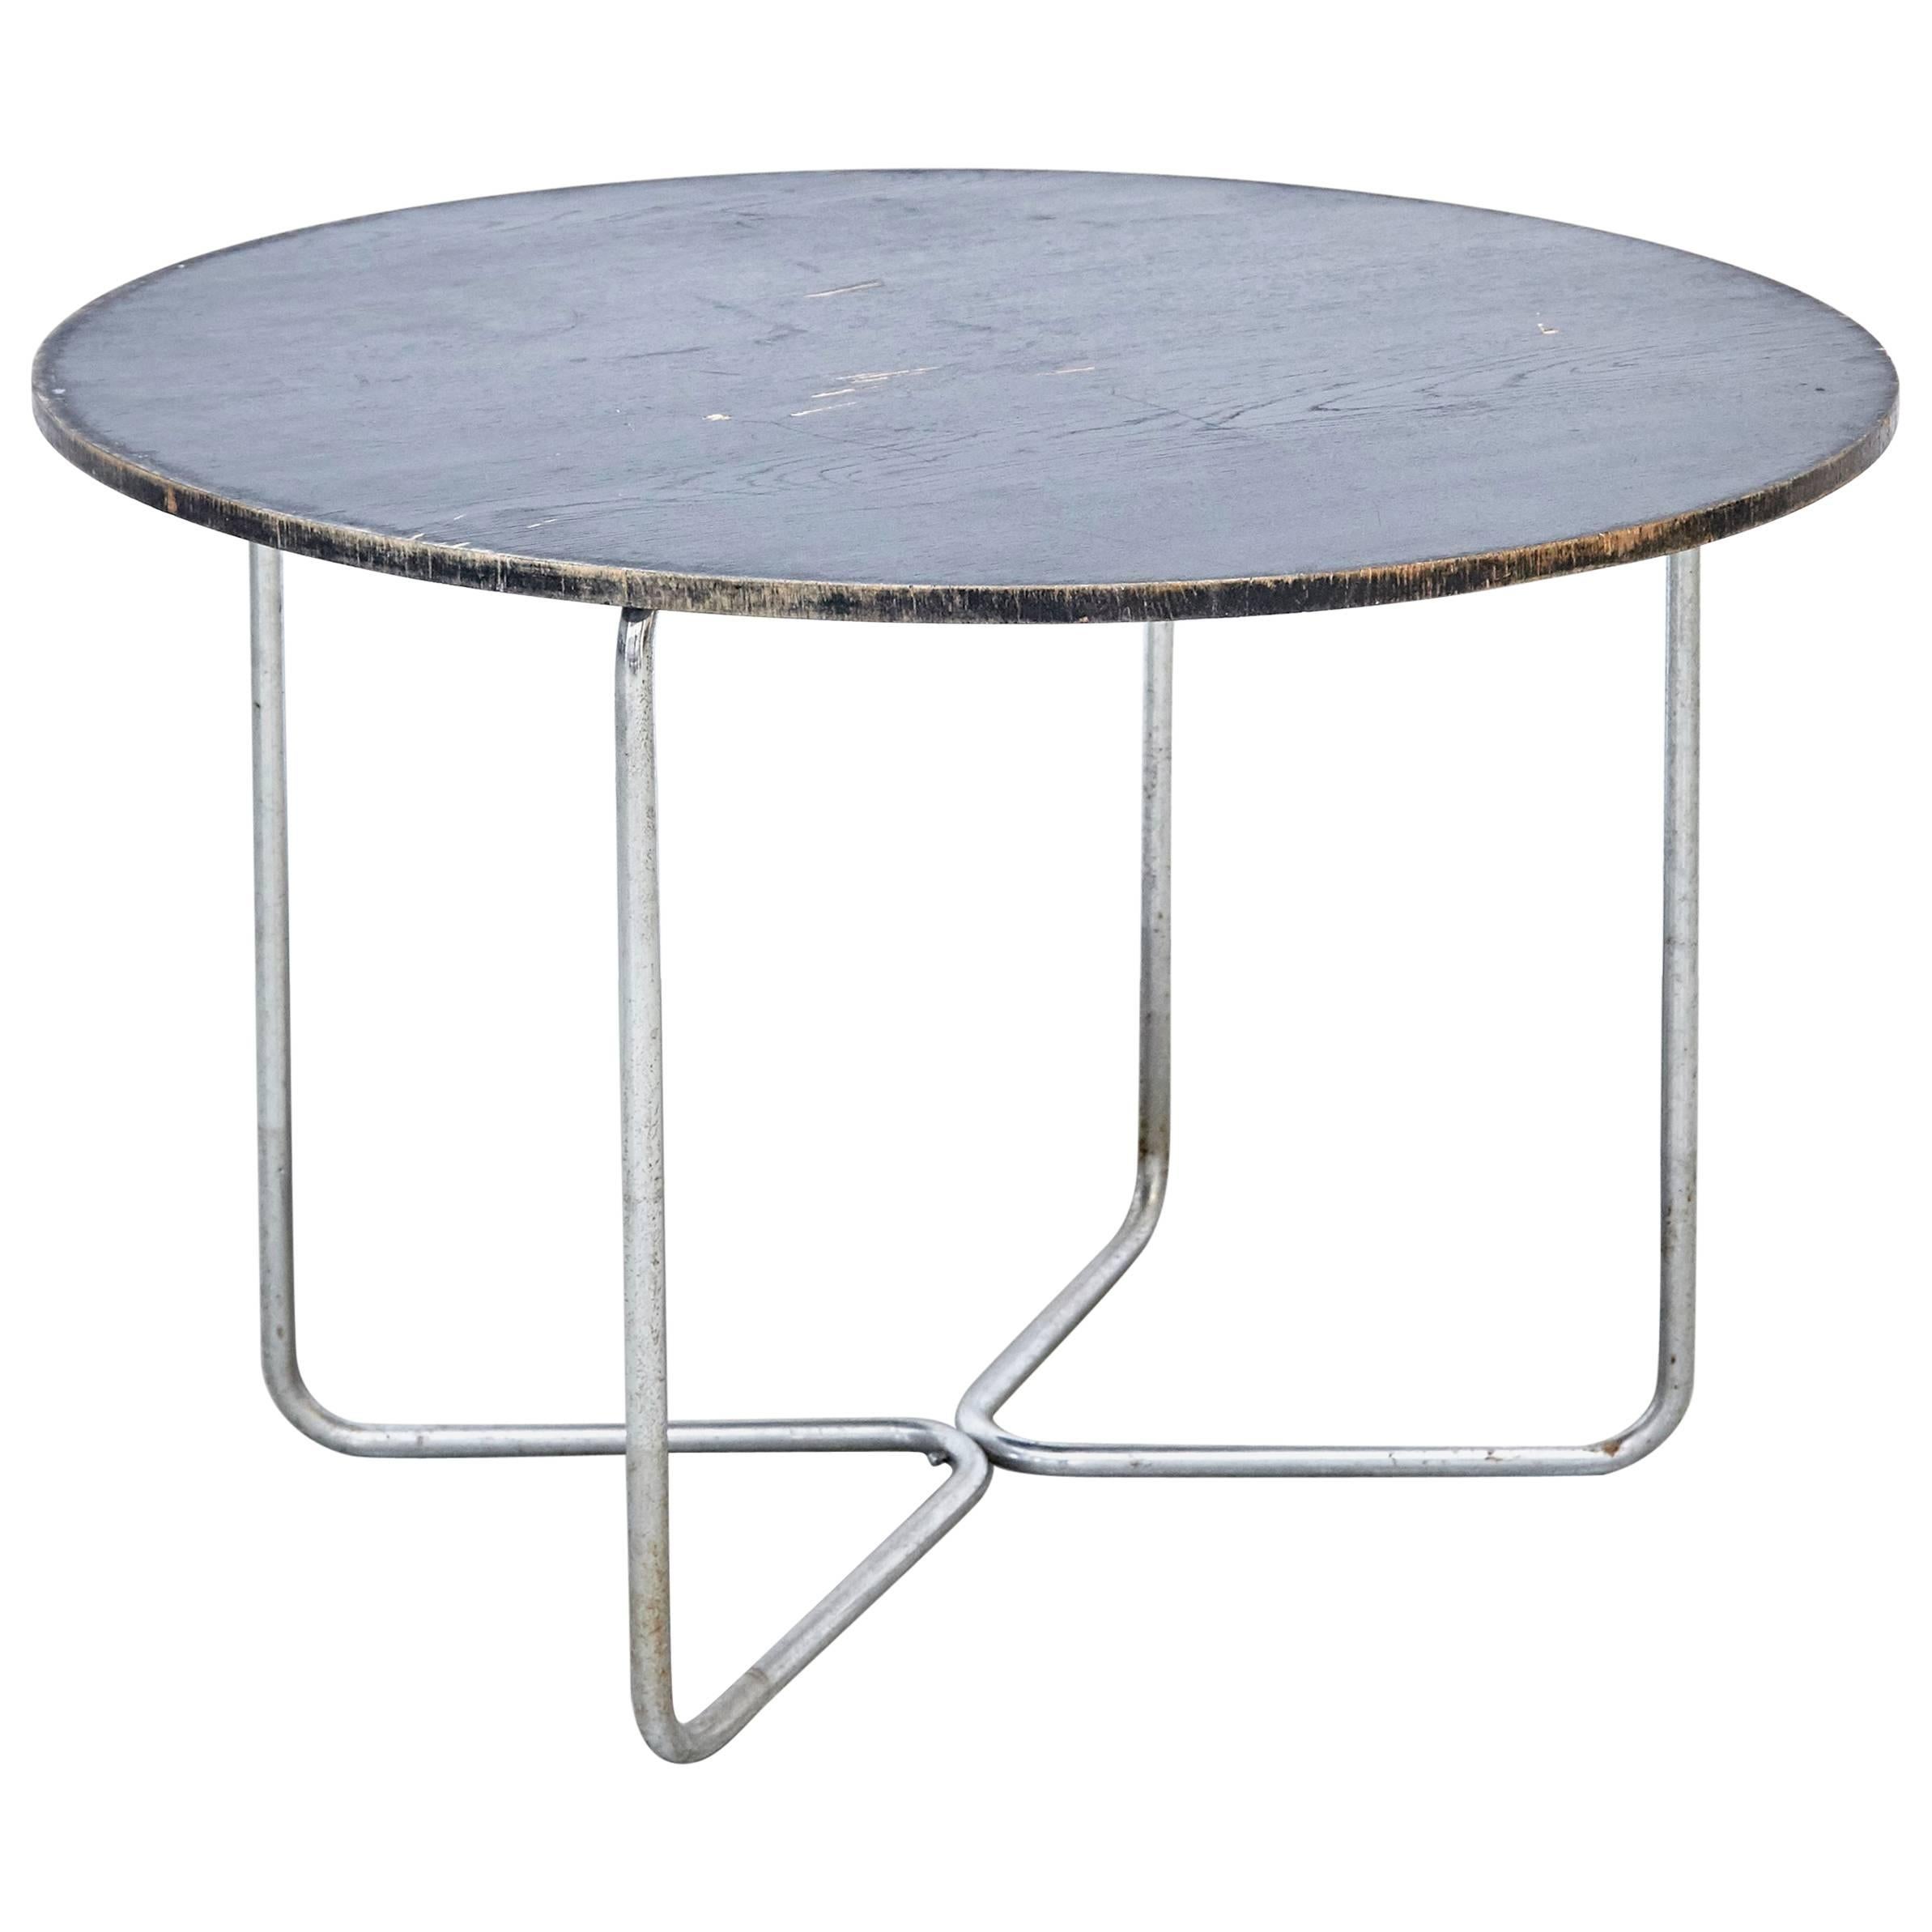 Table by Marcel Breuer 
Manufactured, circa 1940.

In good original condition, with minor wear consistent with age and use, preserving a beautiful patina.

Marcel Breuer (1902-1981), was a Hungarian-born modernist, architect and furniture